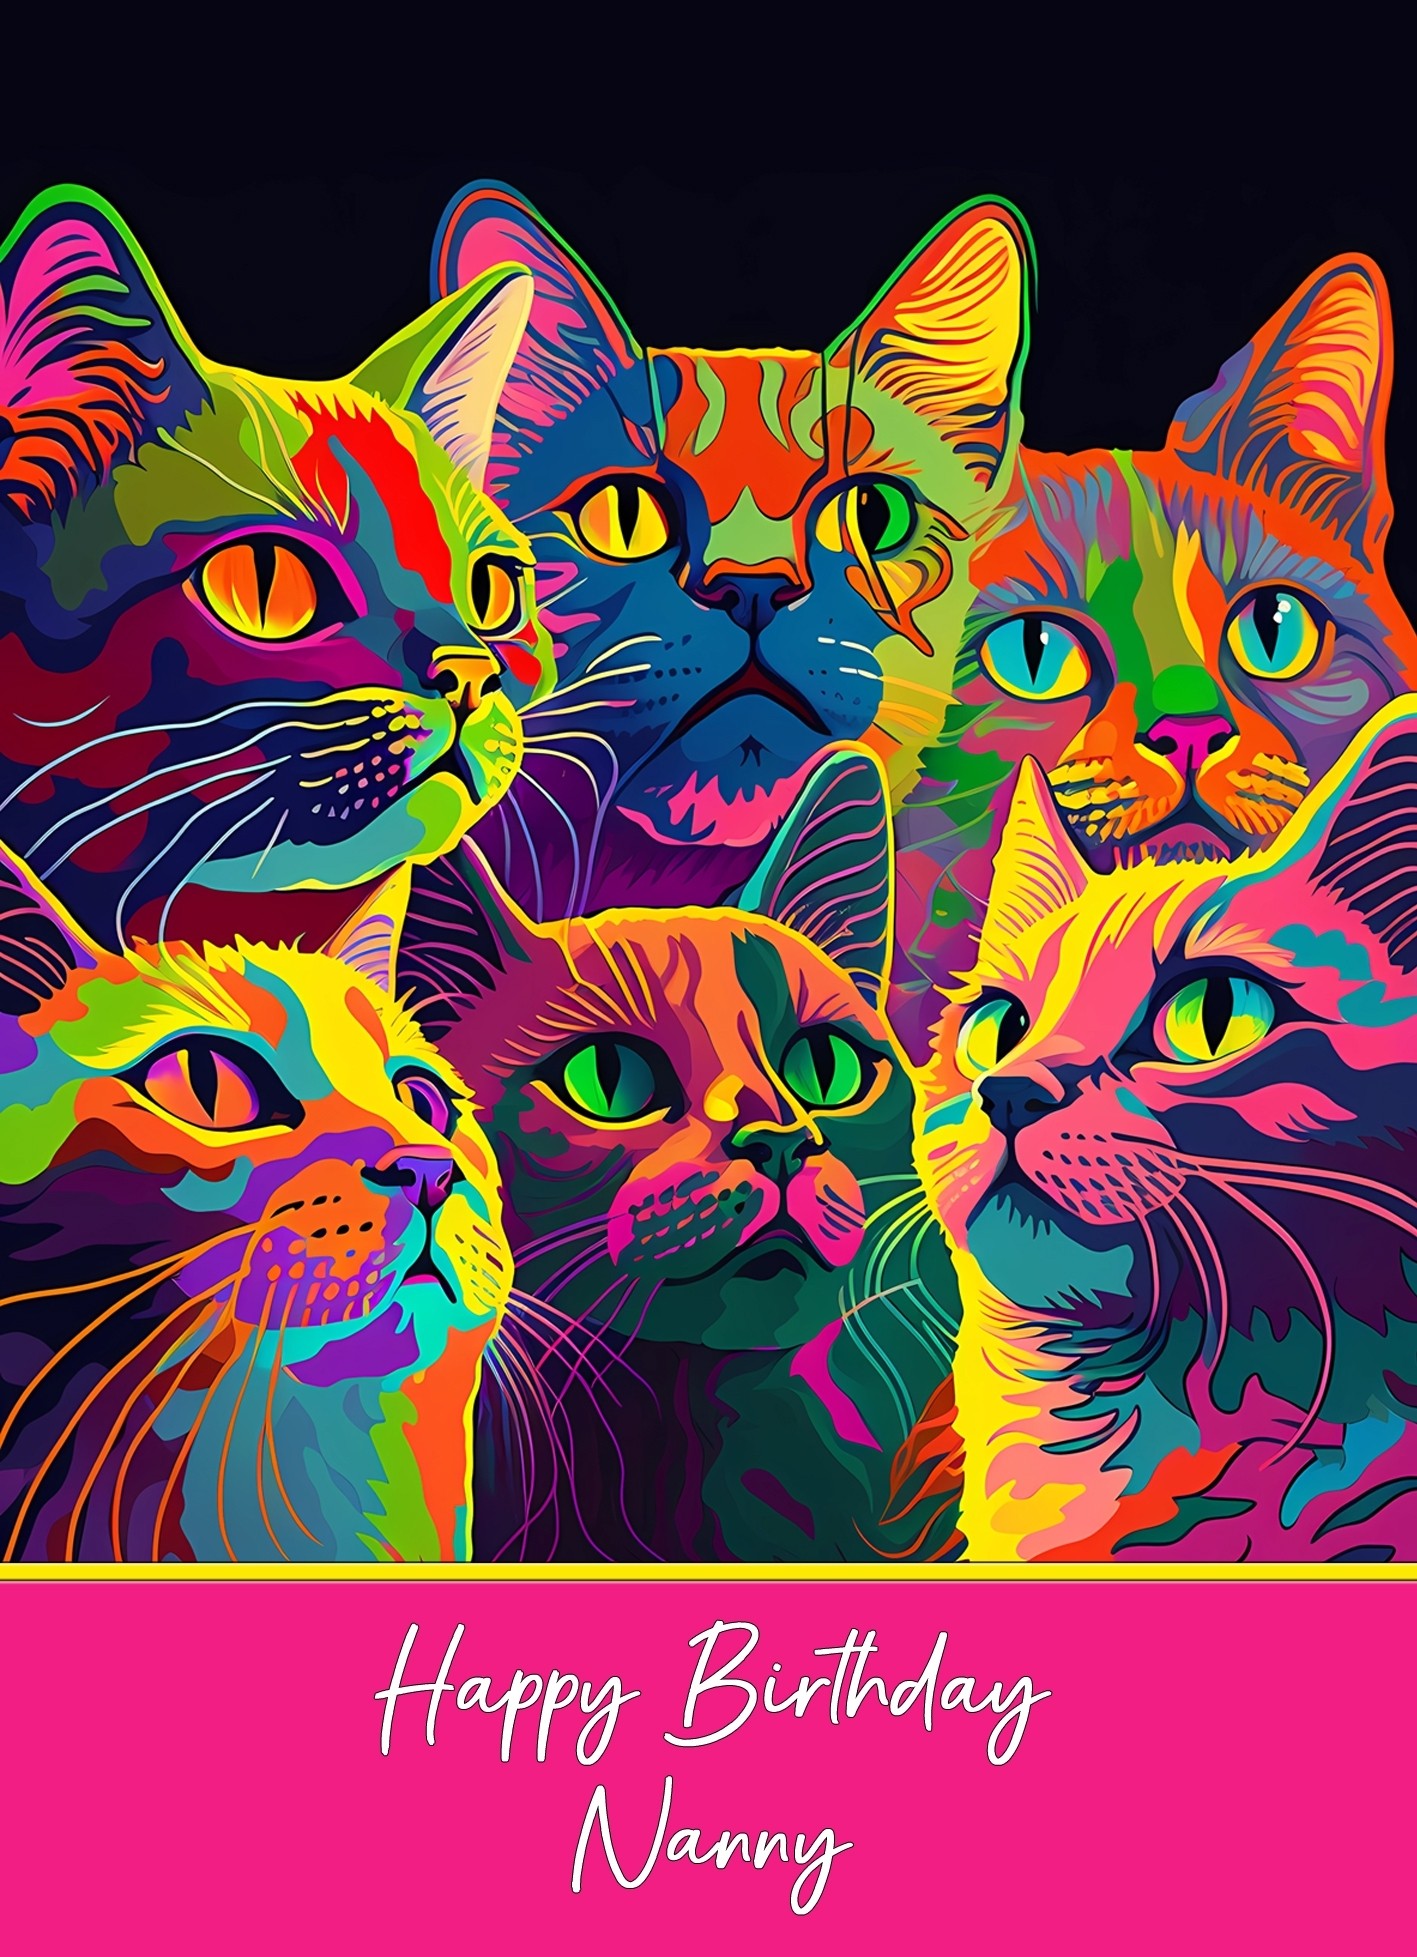 Birthday Card For Nanny (Colourful Cat Art)